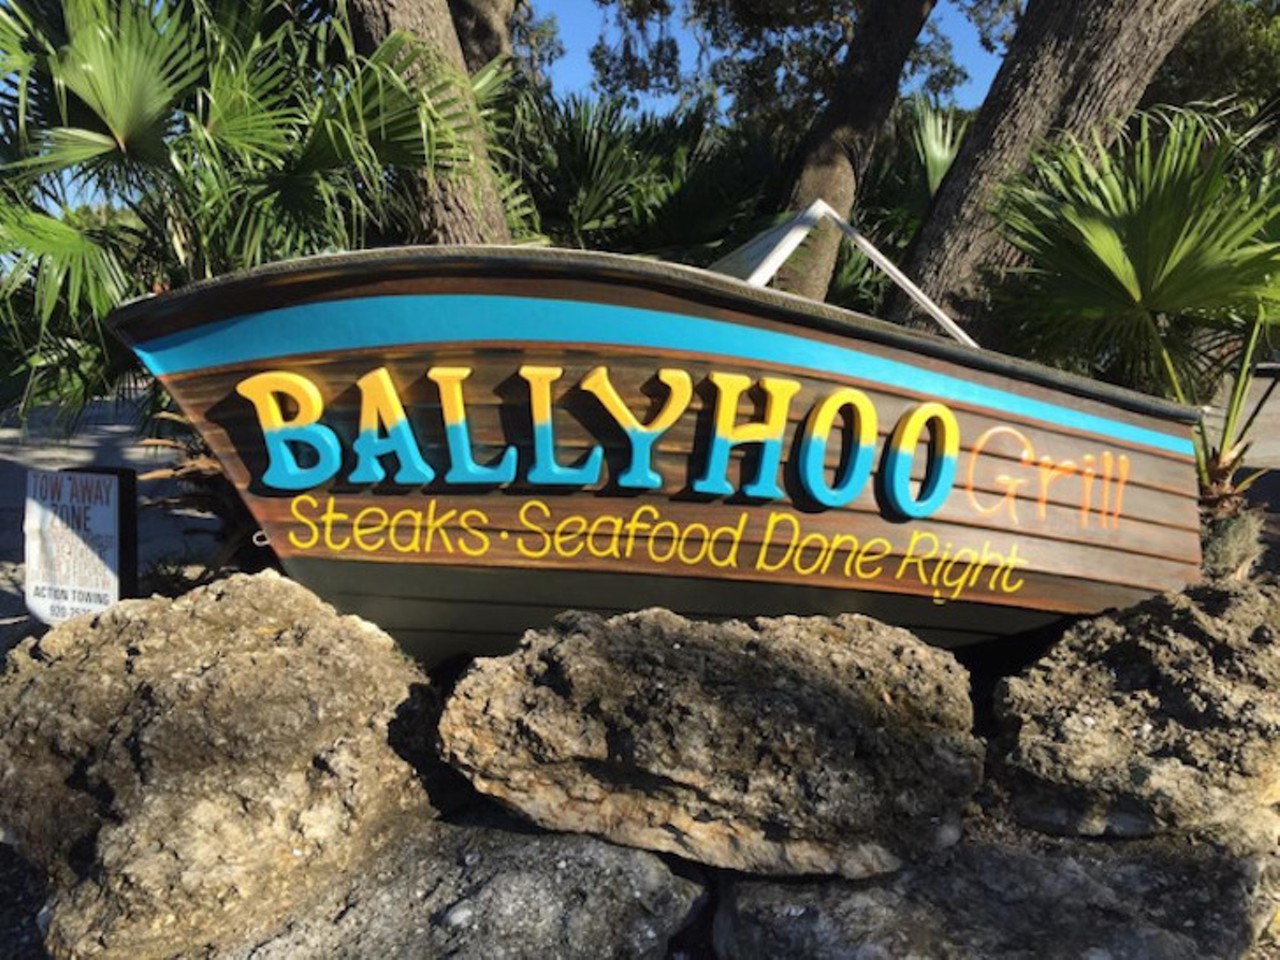 Ballyhoo Grill
7604 Ehrlich Rd., Citrus Park
Citrus Park fish camp staple Ballyhoo Grill closed its doors on Sunday, Sept. 26. Some form of the local favorite has sat at the corner of Ehrlich Road and Gunn Highway since the 1910s.